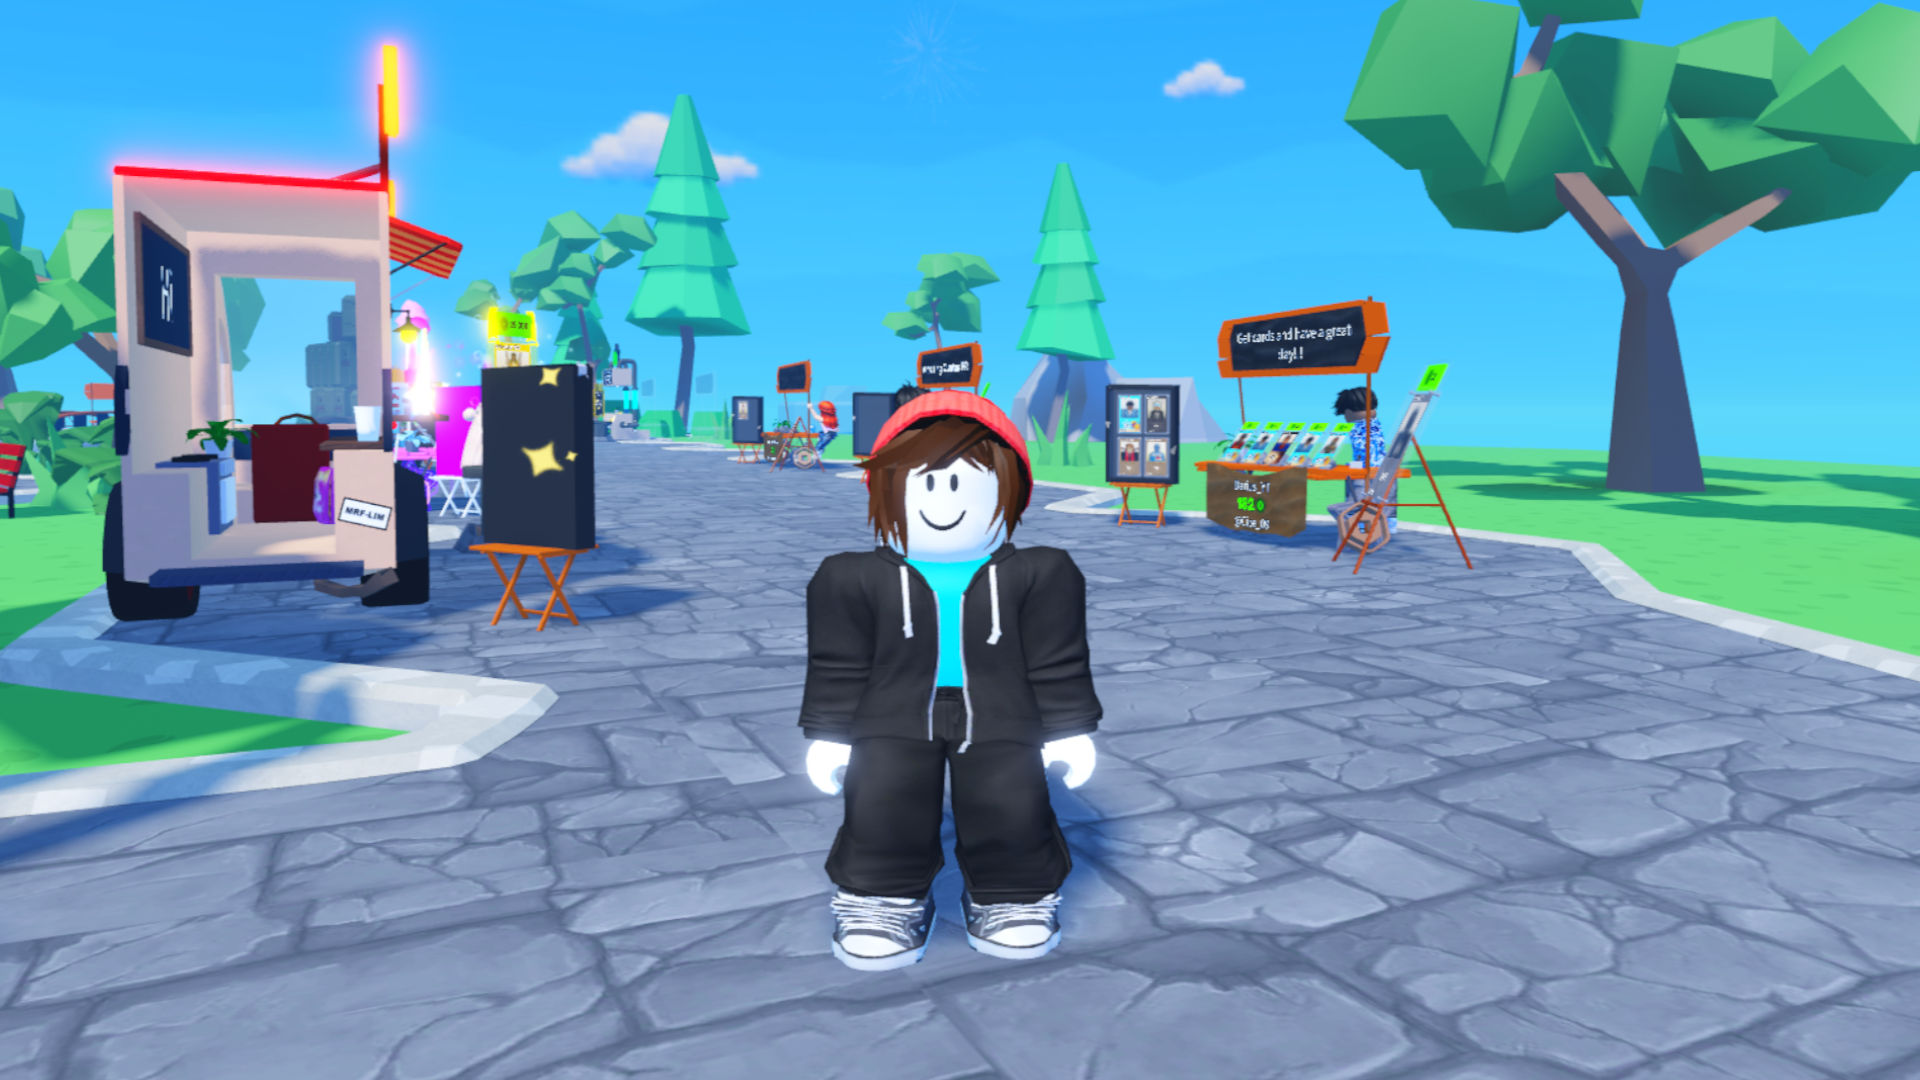 2022 *5 NEW* ROBLOX PROMO CODES All Free ROBUX Items in JULY + EVENT